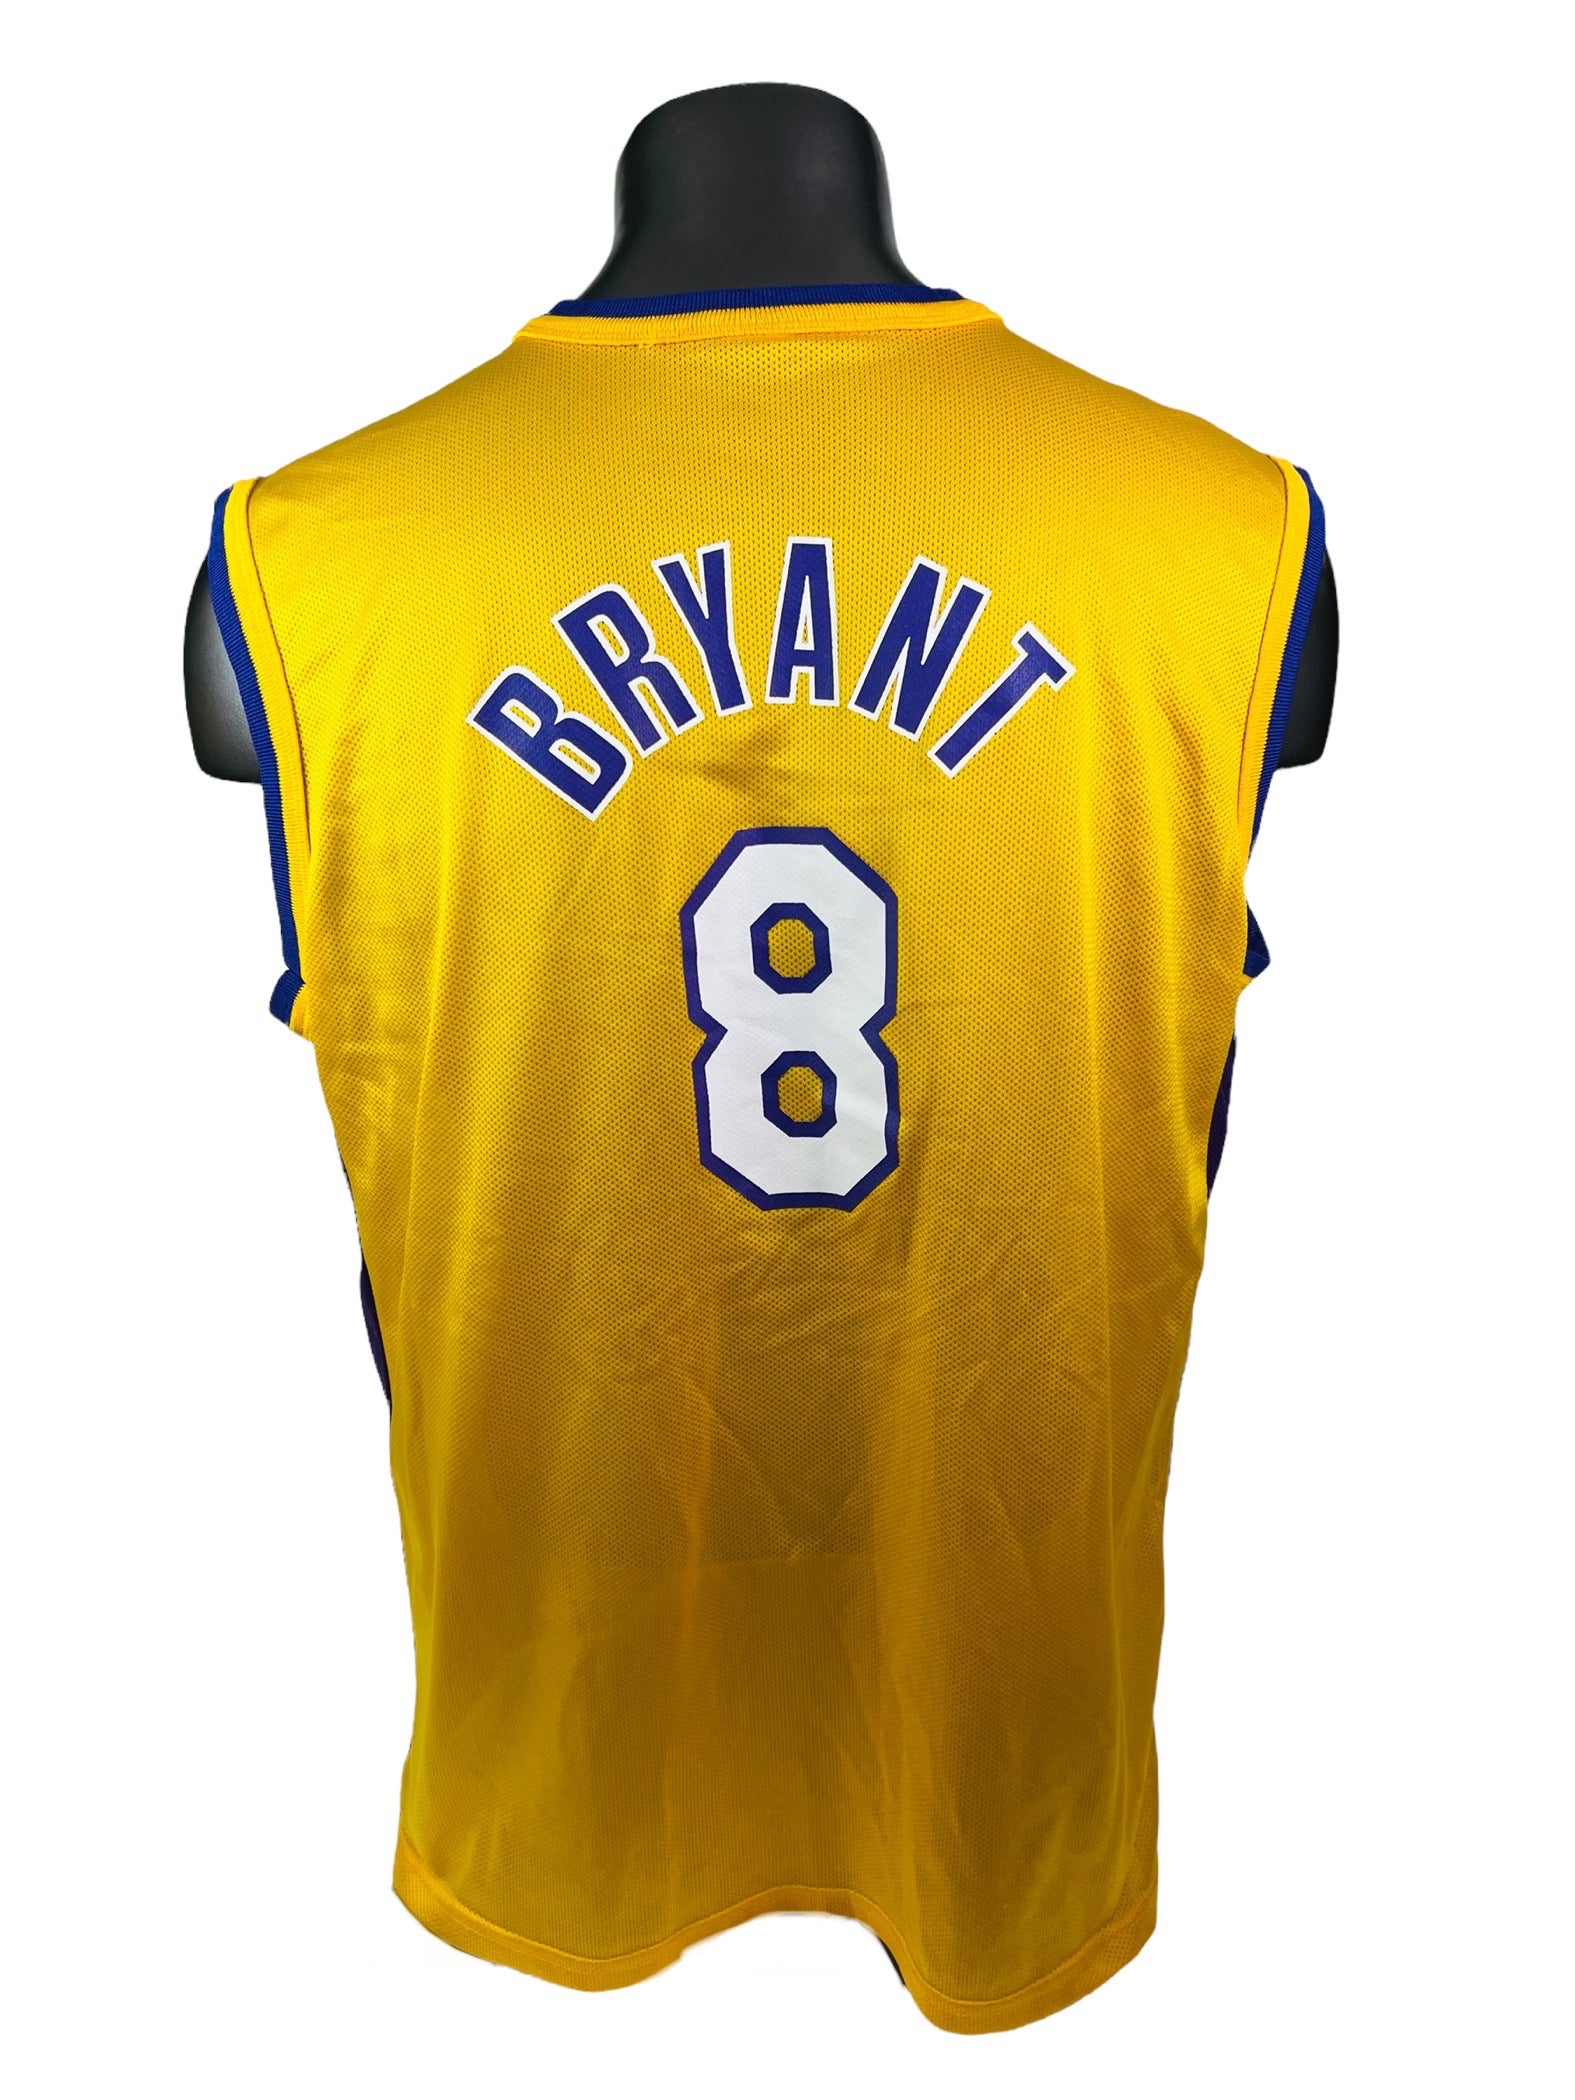 Los Angeles Lakers Kobe Bryant Jersey - clothing & accessories